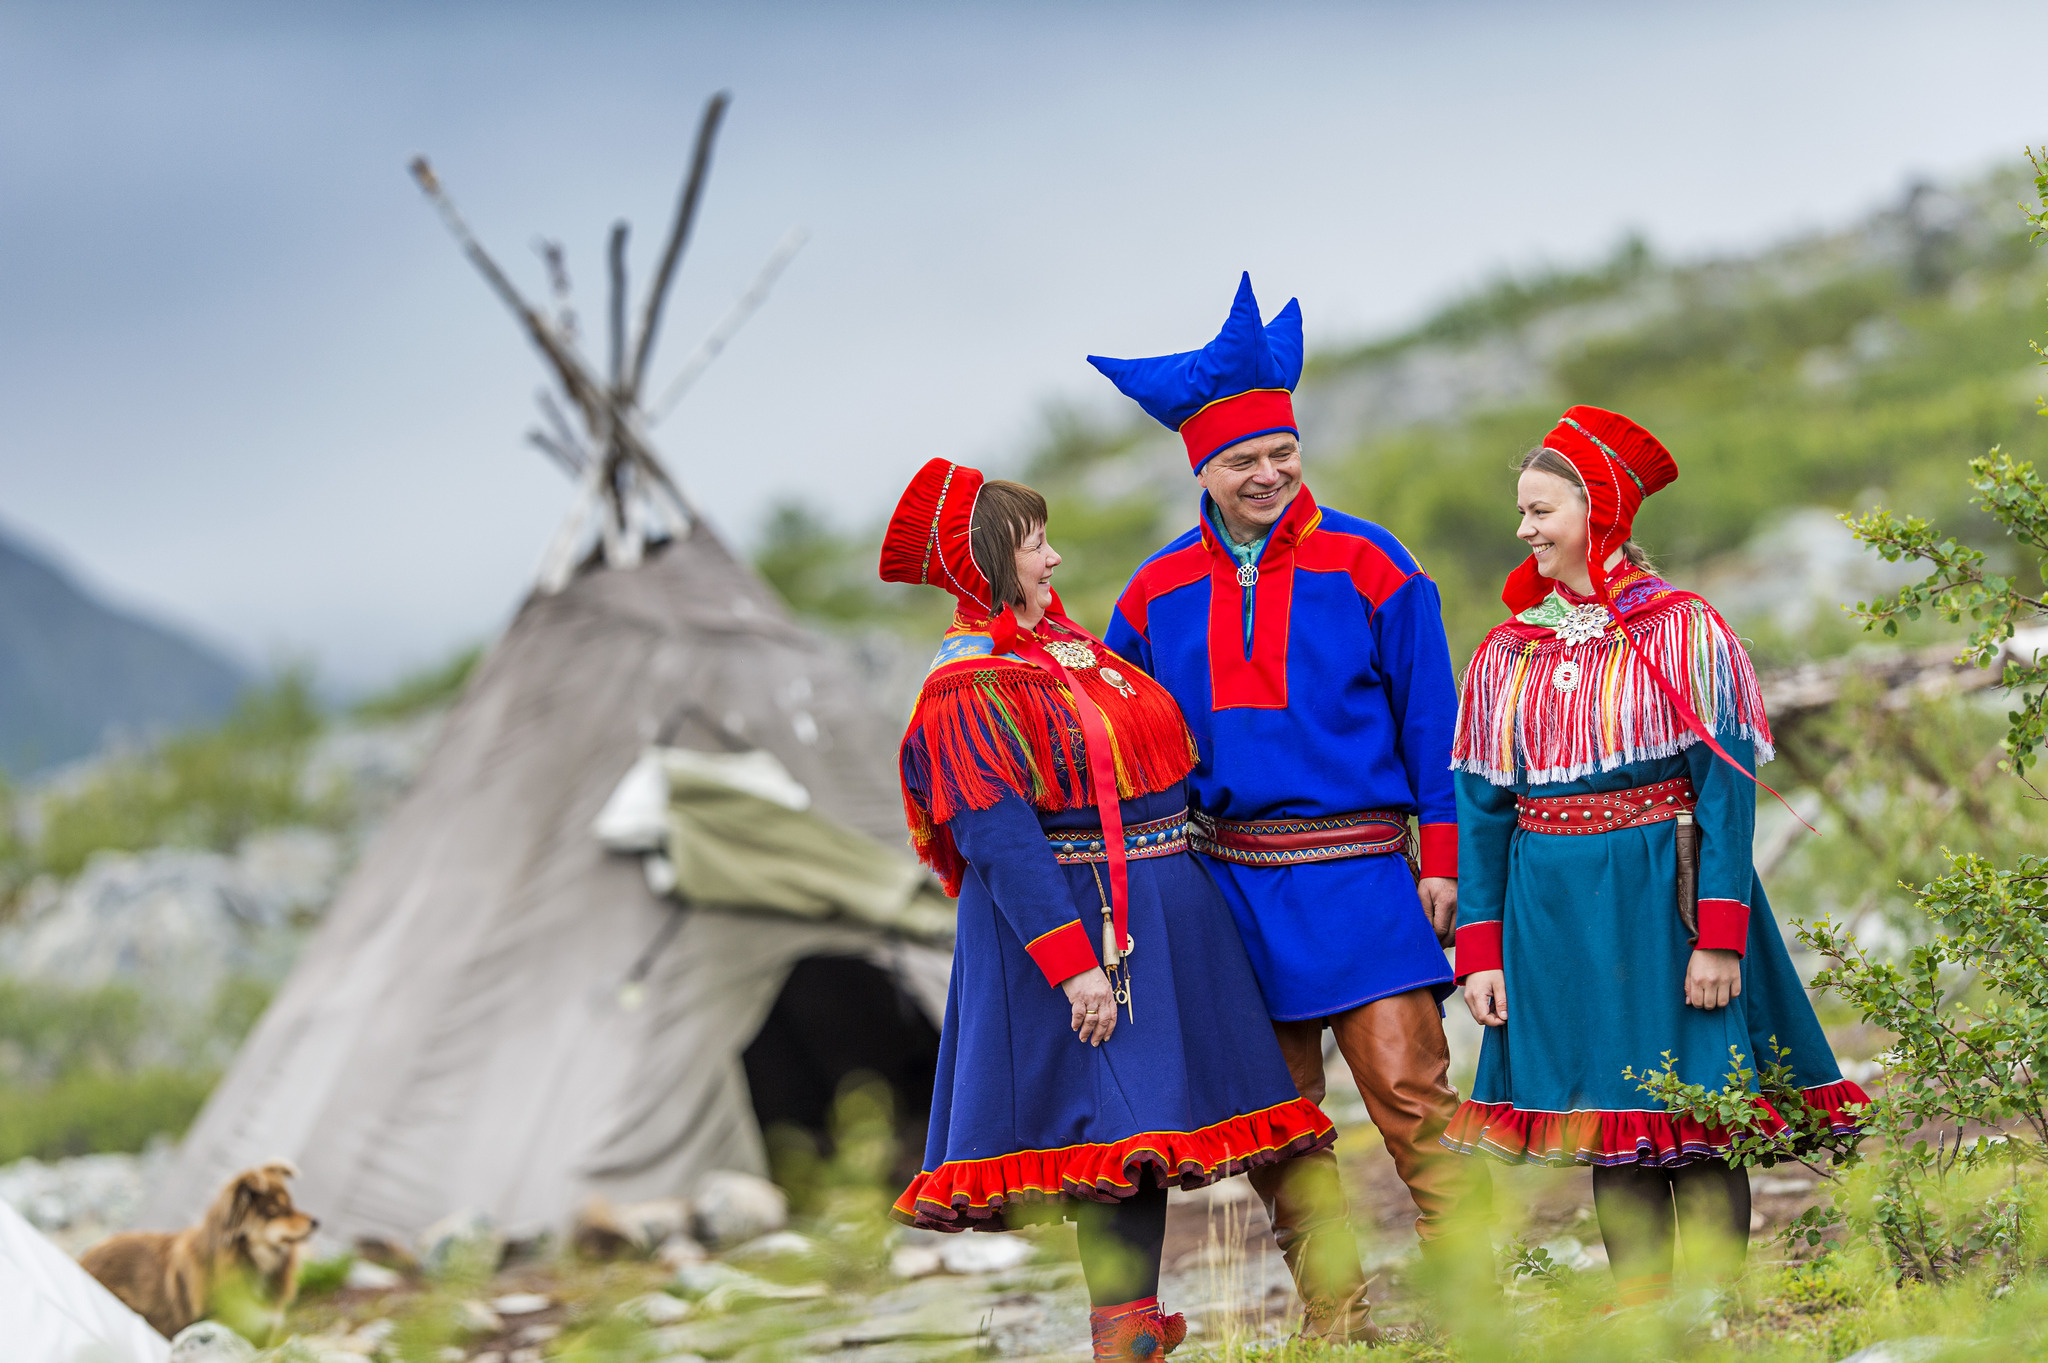 Sámi people in traditional dress stand outside what is probably a lavvu.